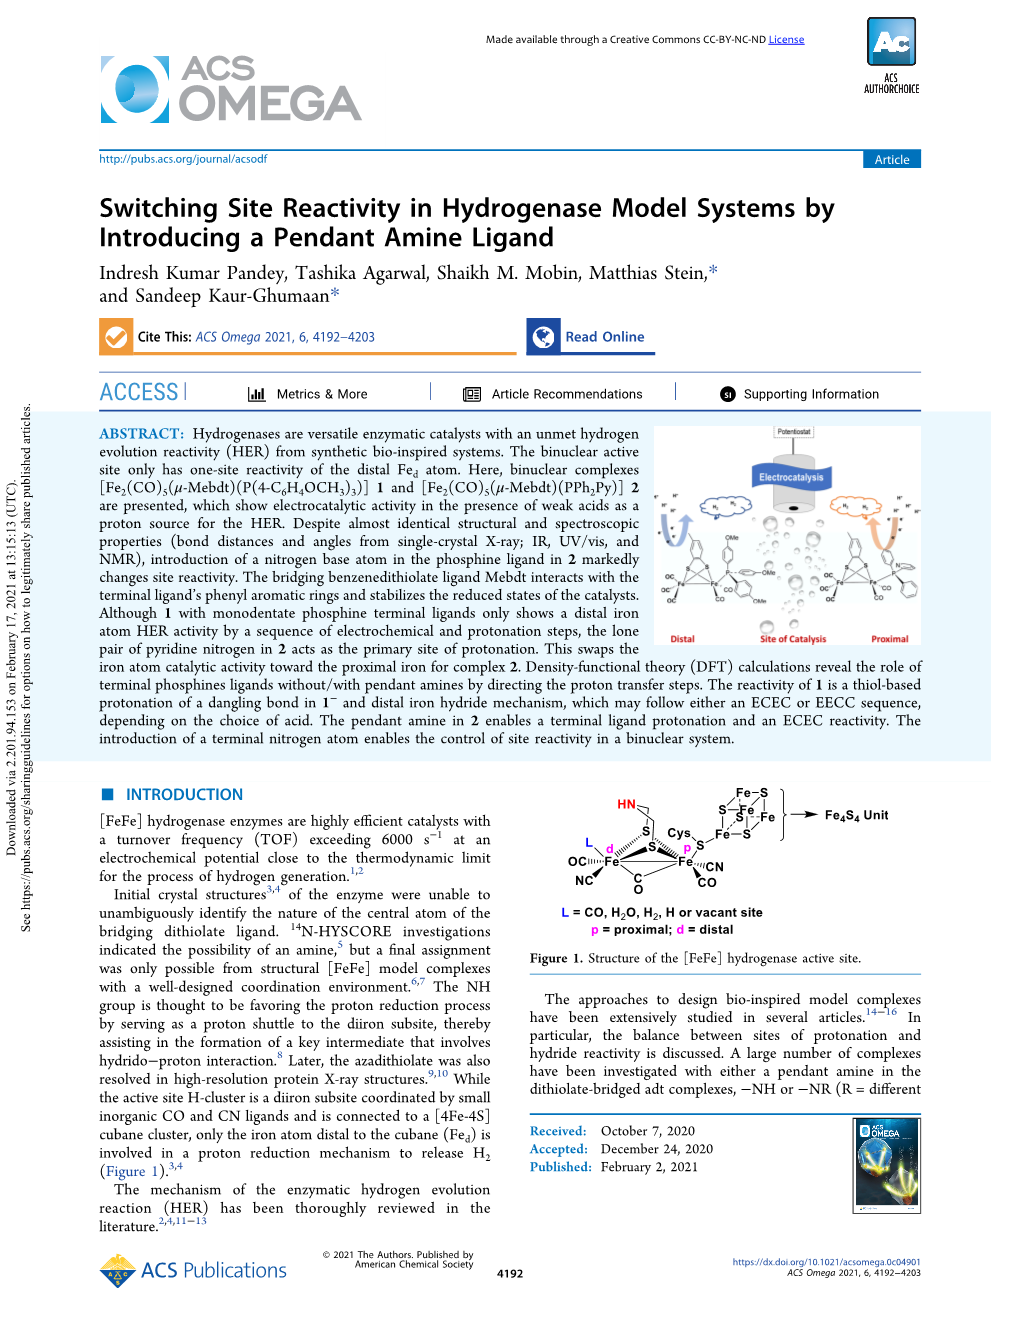 Switching Site Reactivity in Hydrogenase Model Systems by Introducing a Pendant Amine Ligand Indresh Kumar Pandey, Tashika Agarwal, Shaikh M